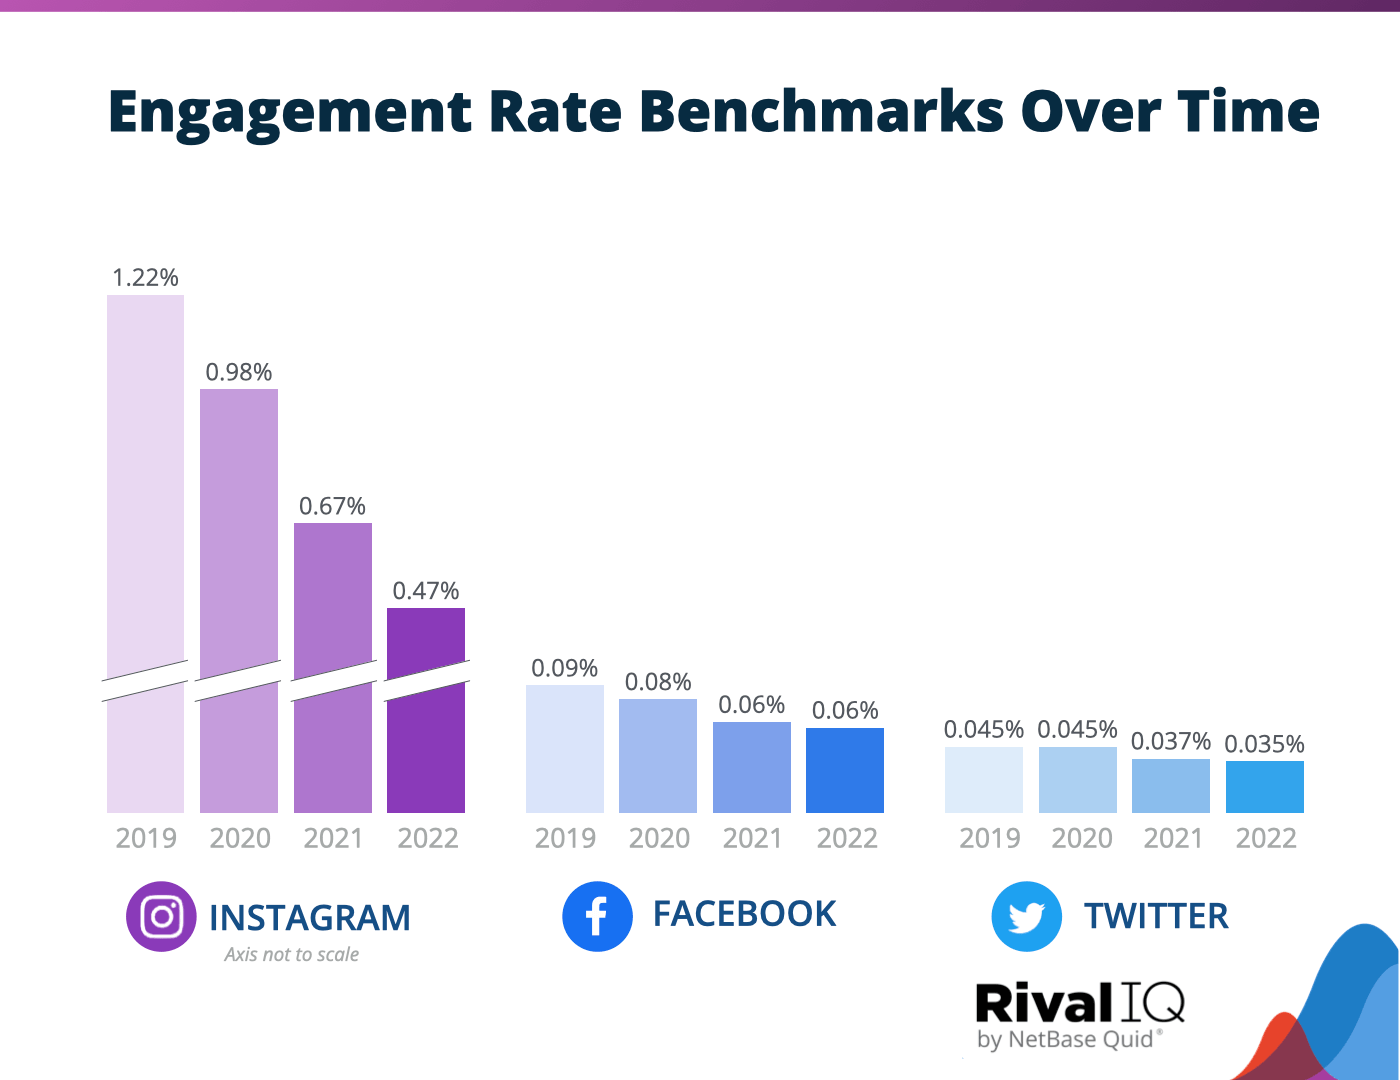 A chart showing engagement rate benchmarks over the past four years for Instagram, Facebook and Twitter